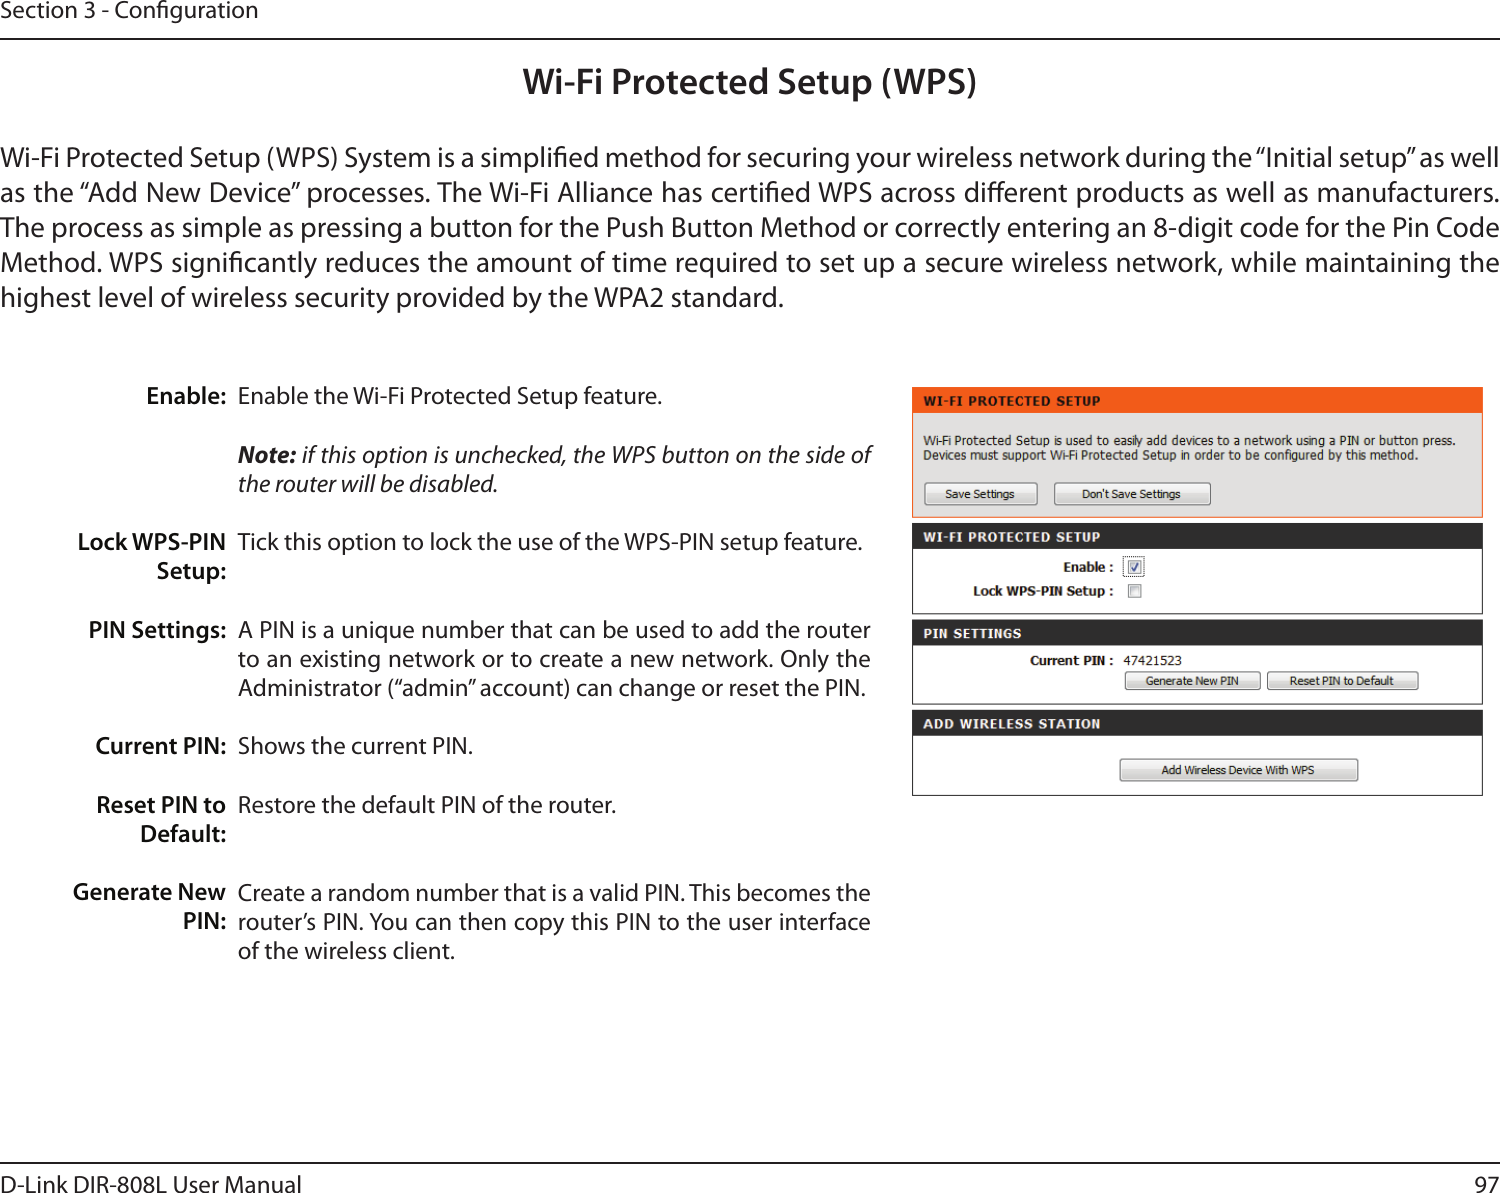 97D-Link DIR-808L User ManualSection 3 - CongurationWi-Fi Protected Setup (WPS)Enable the Wi-Fi Protected Setup feature. Note: if this option is unchecked, the WPS button on the side of the router will be disabled.Tick this option to lock the use of the WPS-PIN setup feature.A PIN is a unique number that can be used to add the router to an existing network or to create a new network. Only the Administrator (“admin” account) can change or reset the PIN. Shows the current PIN. Restore the default PIN of the router. Create a random number that is a valid PIN. This becomes the router’s PIN. You can then copy this PIN to the user interface of the wireless client.Enable:Lock WPS-PIN Setup:PIN Settings:Current PIN:Reset PIN to Default:Generate New PIN:Wi-Fi Protected Setup (WPS) System is a simplied method for securing your wireless network during the “Initial setup” as well as the “Add New Device” processes. The Wi-Fi Alliance has certied WPS across dierent products as well as manufacturers. The process as simple as pressing a button for the Push Button Method or correctly entering an 8-digit code for the Pin Code Method. WPS signicantly reduces the amount of time required to set up a secure wireless network, while maintaining the highest level of wireless security provided by the WPA2 standard.